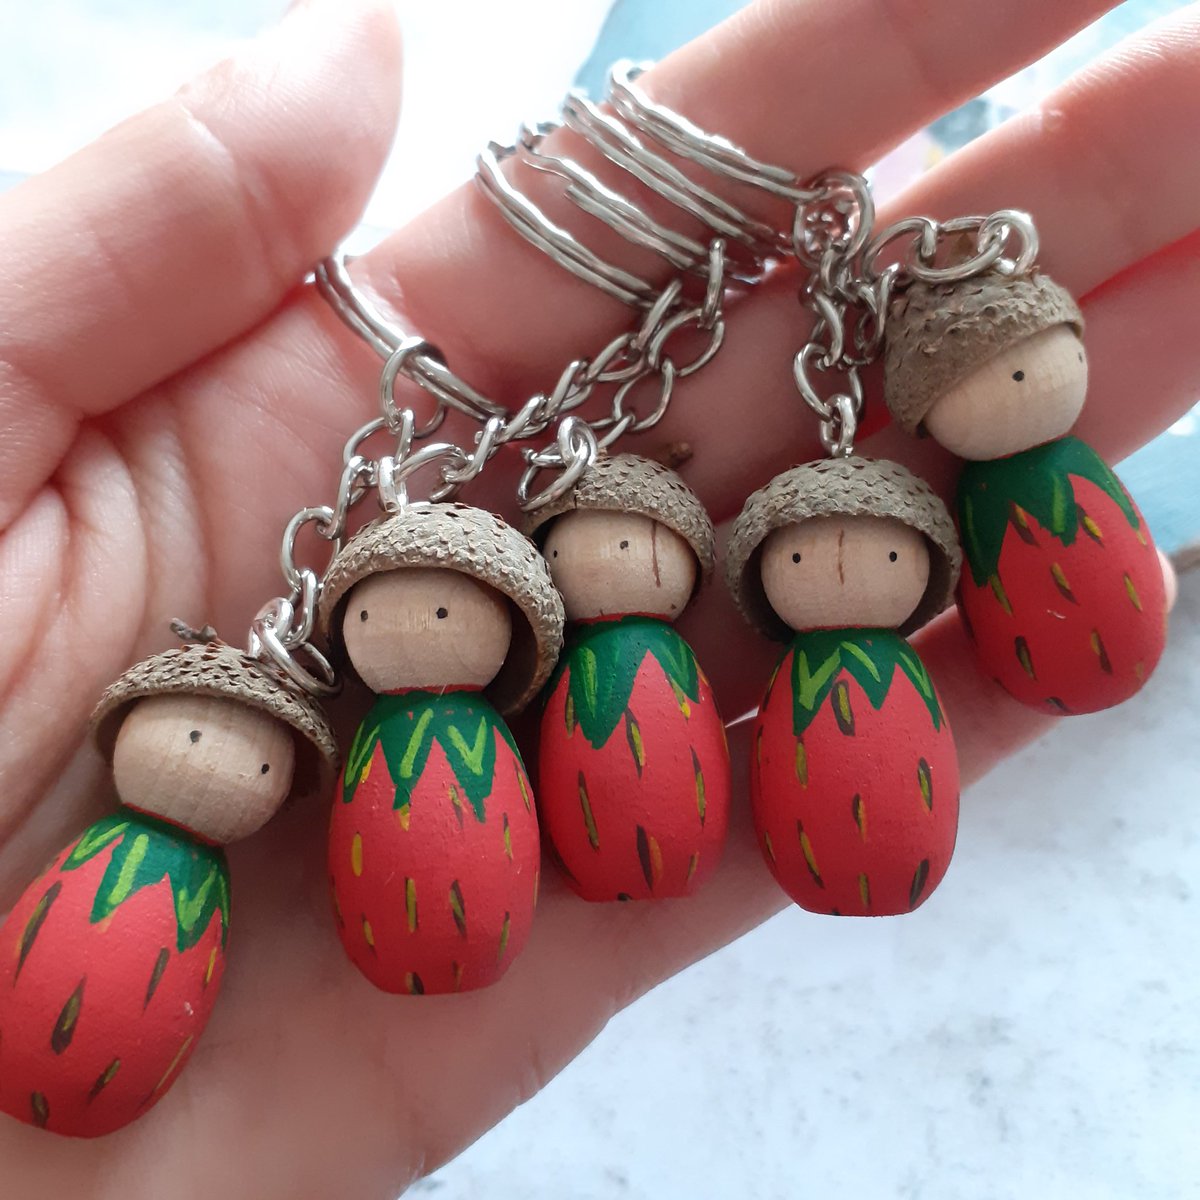 What is your favourite fruit? I love strawberries 🍓 These were the original Peggy keychains I painted #strawberry #earlybiz #shopindie #etsy #buyindie #UKGiftHourAM